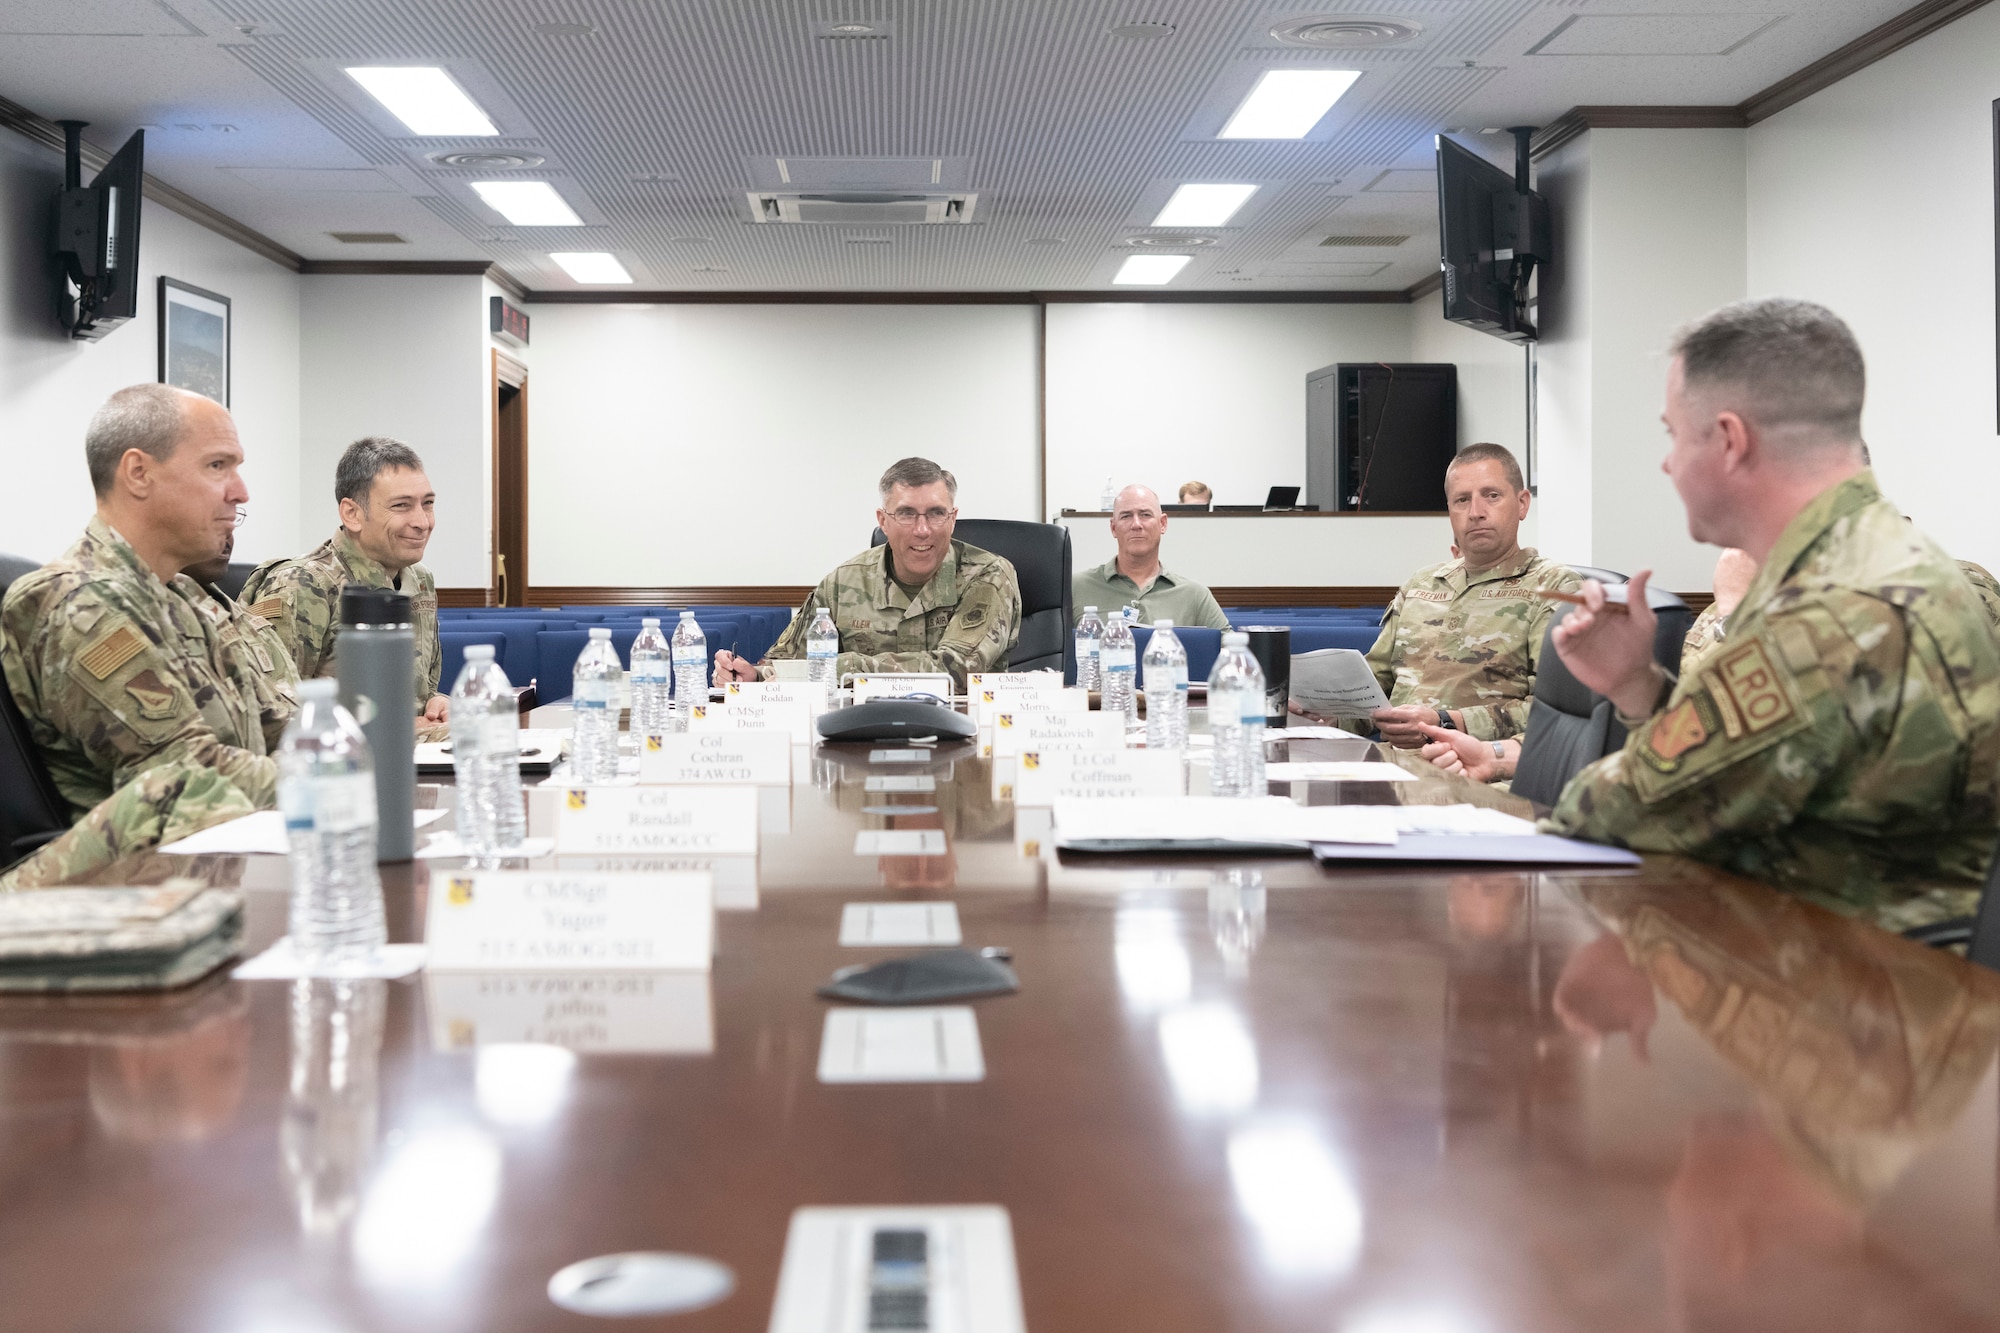 six soldiers talk at a conference table